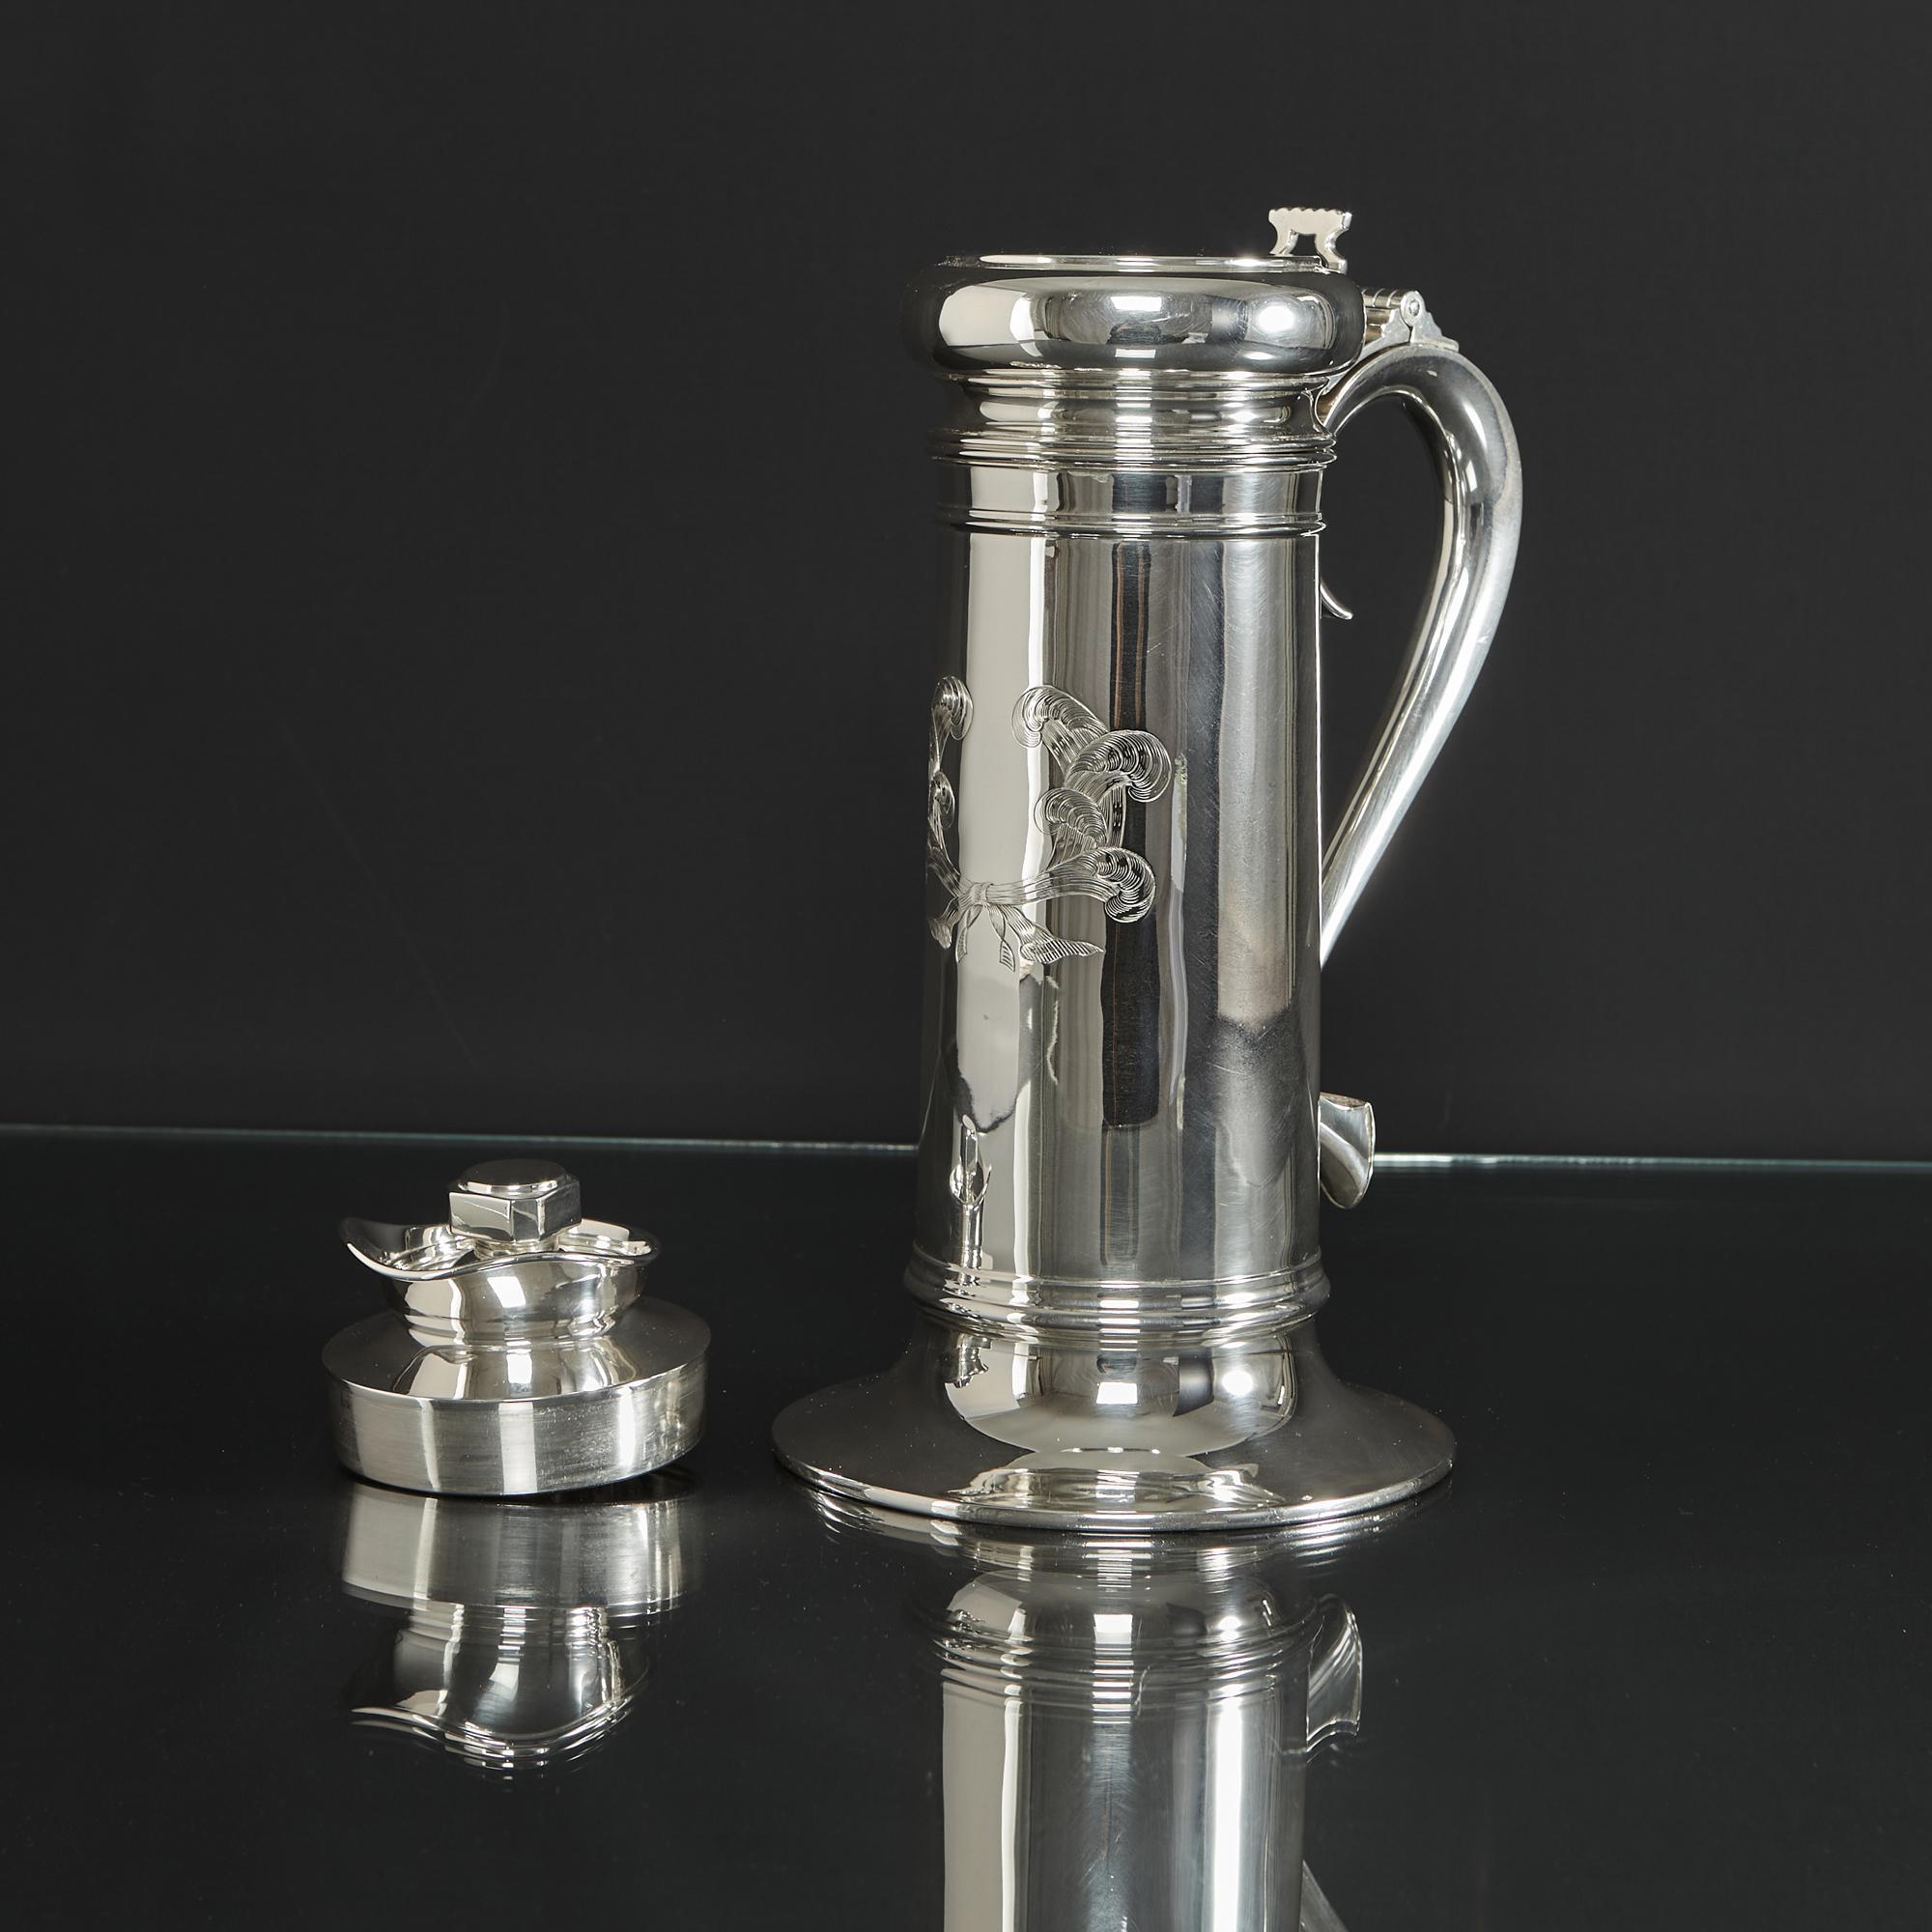 Antique novelty silver cocktail shaker in the form of an early 17th century tankard, fitted with a hinged cover and a cut-out thumbpiece. The interior is fitted with a twist and lift-off cover that features a clever opening and closing swivel